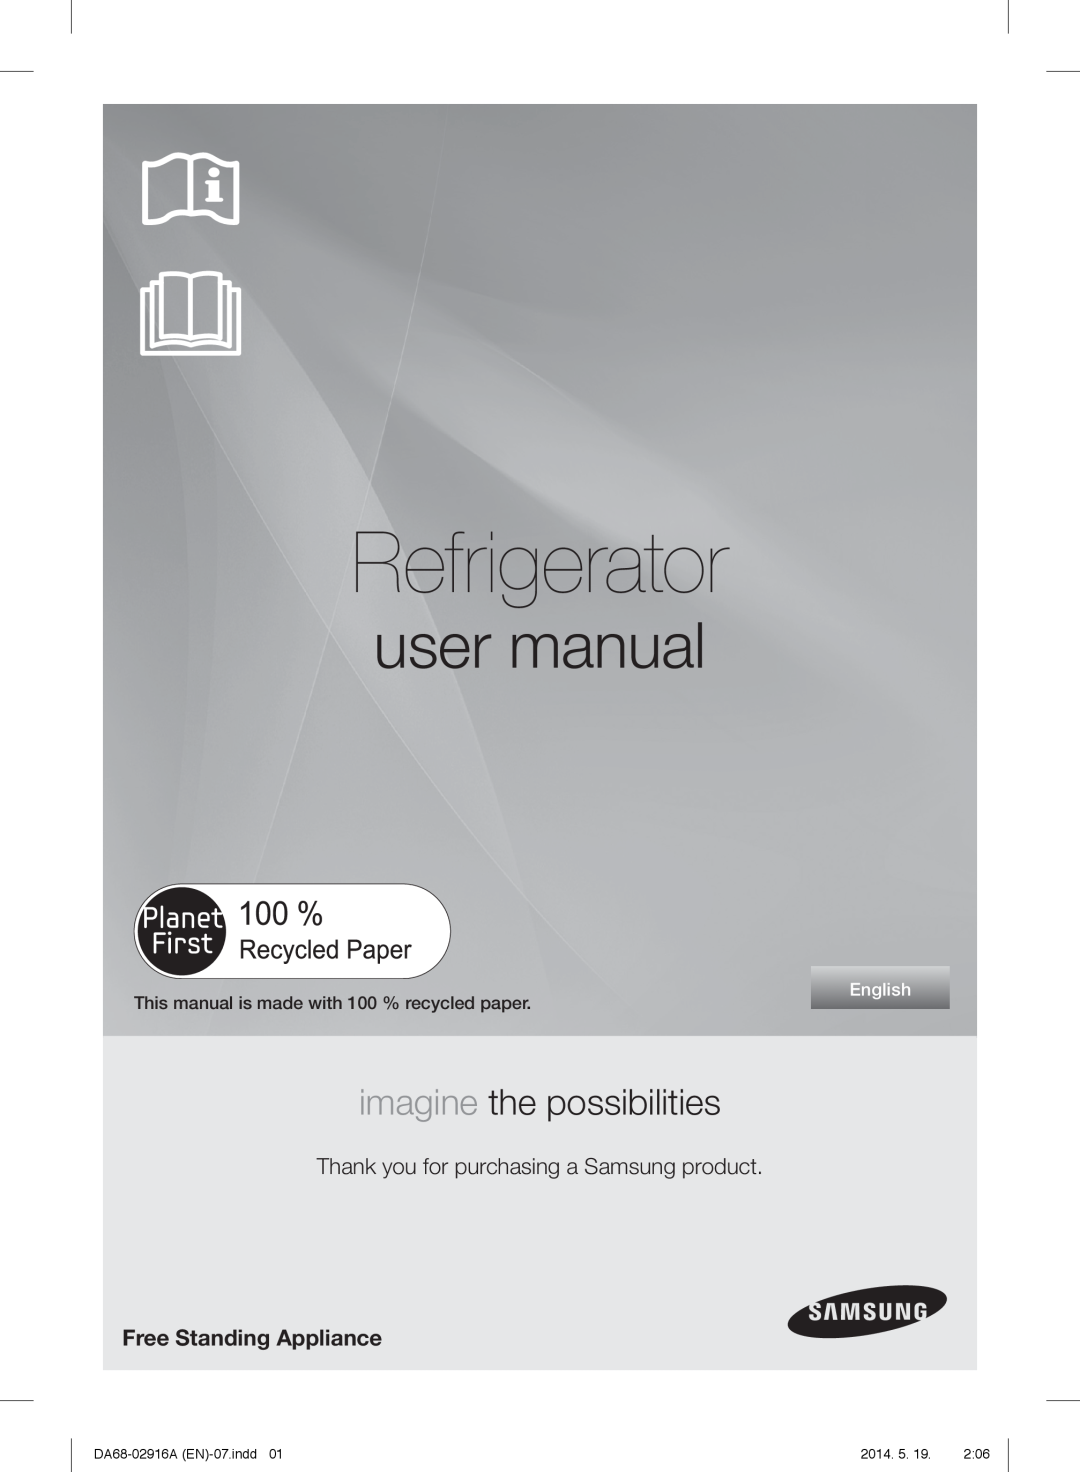 Samsung RF24FSEDBSR user manual Refrigerator, imagine the possibilities, Thank you for purchasing this Samsung product 